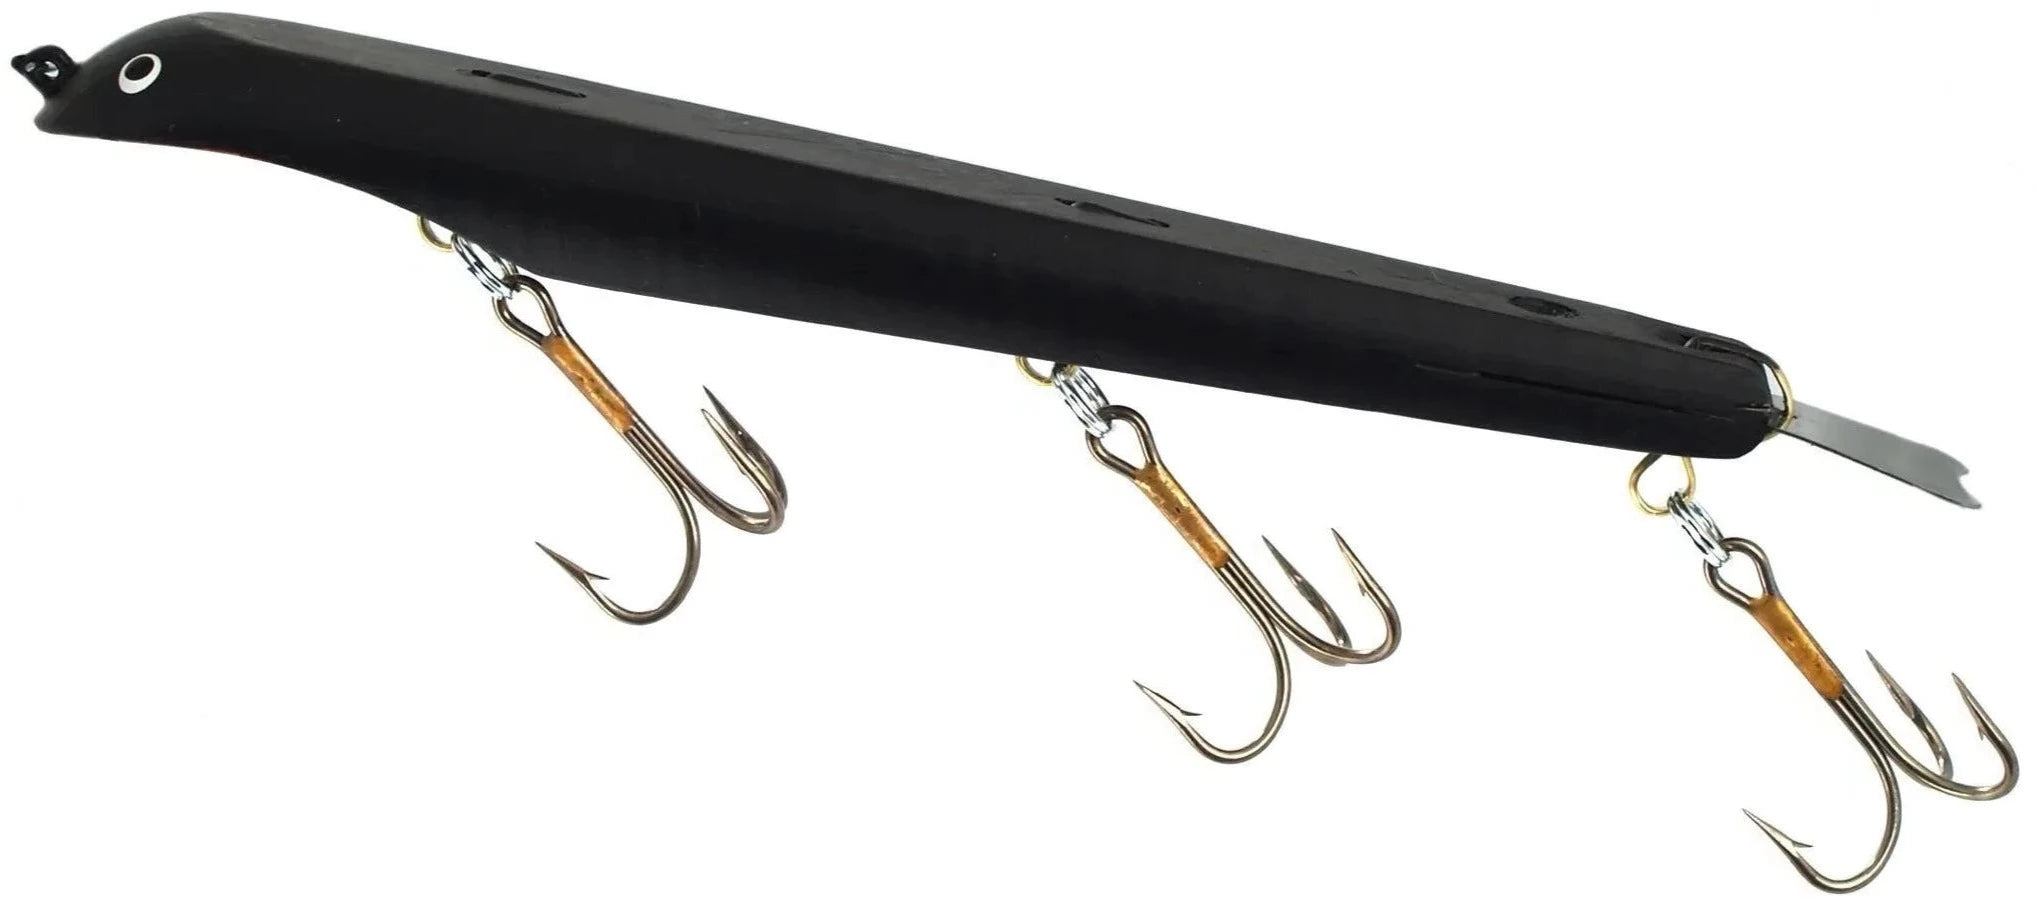 Suick Non-Weighted Magnum Thriller 12 Dive & Rise Bait | Musky lures All Black